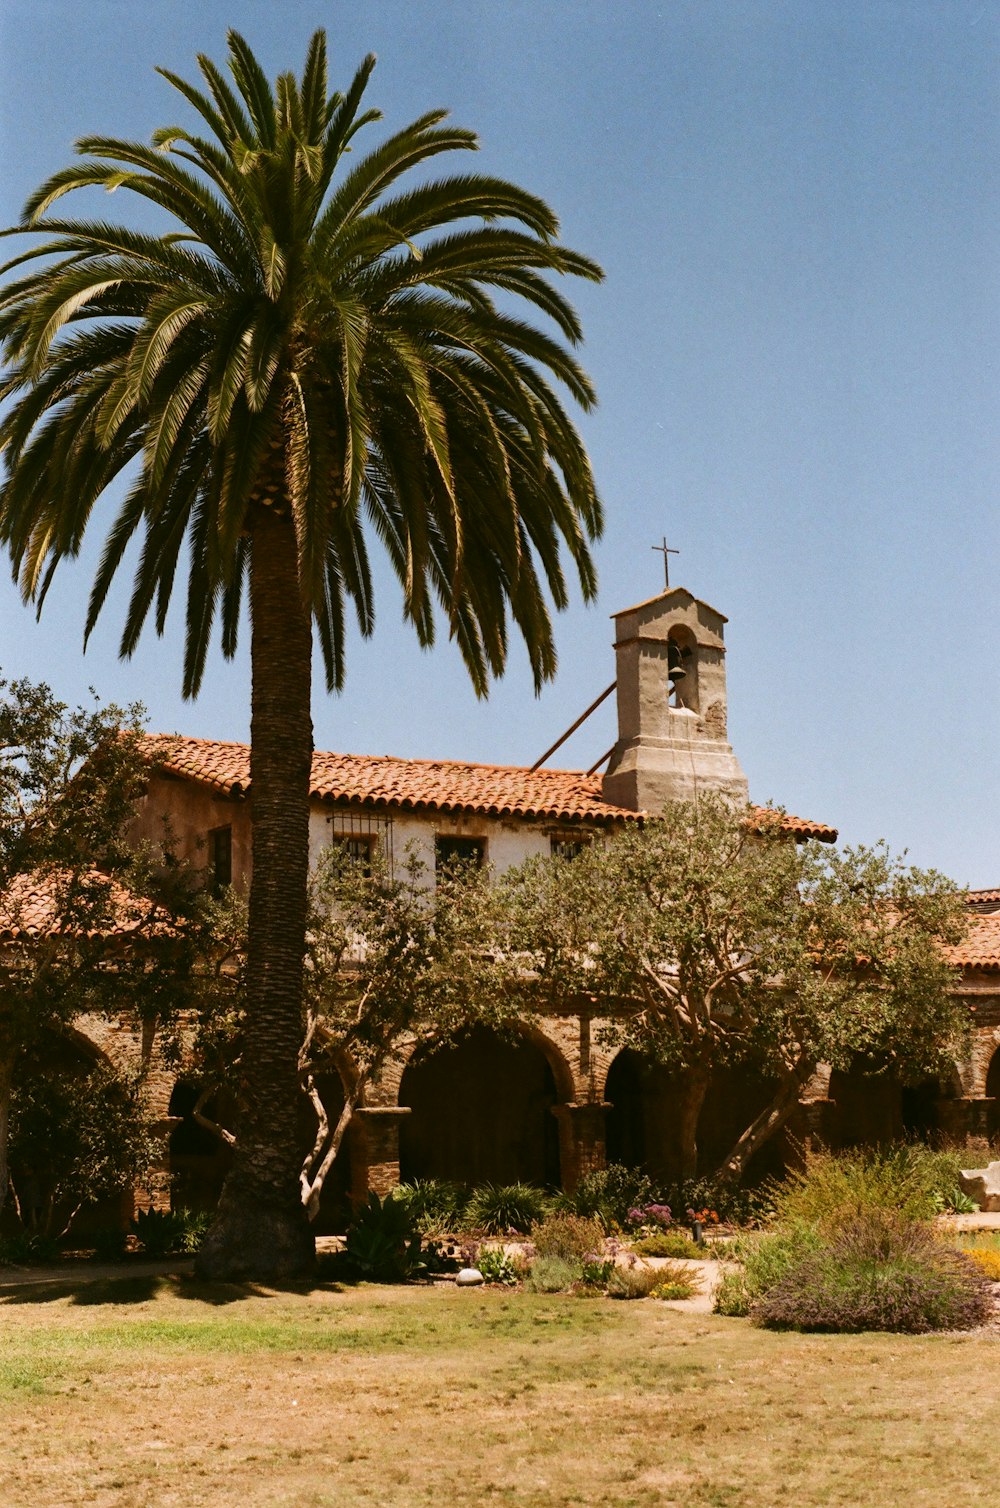 a palm tree in front of a church